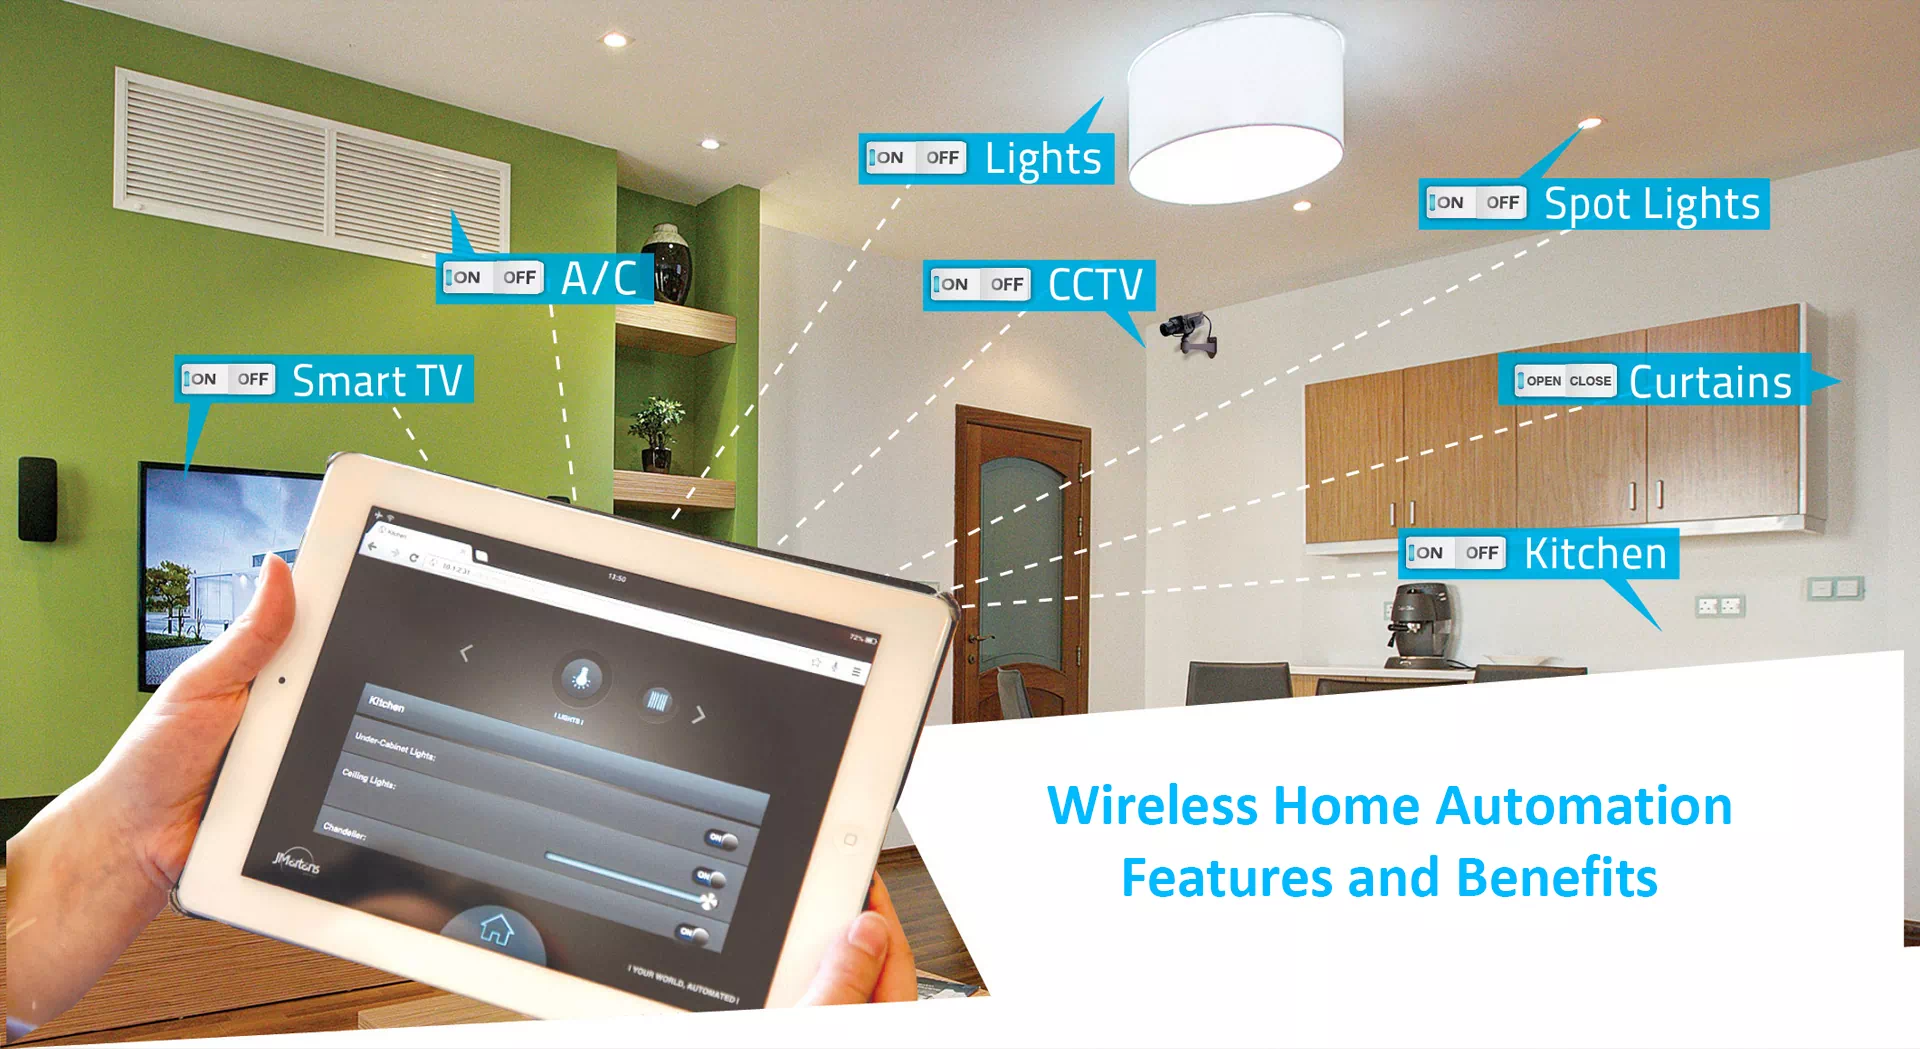 Wireless Home Automation Features and Benefits